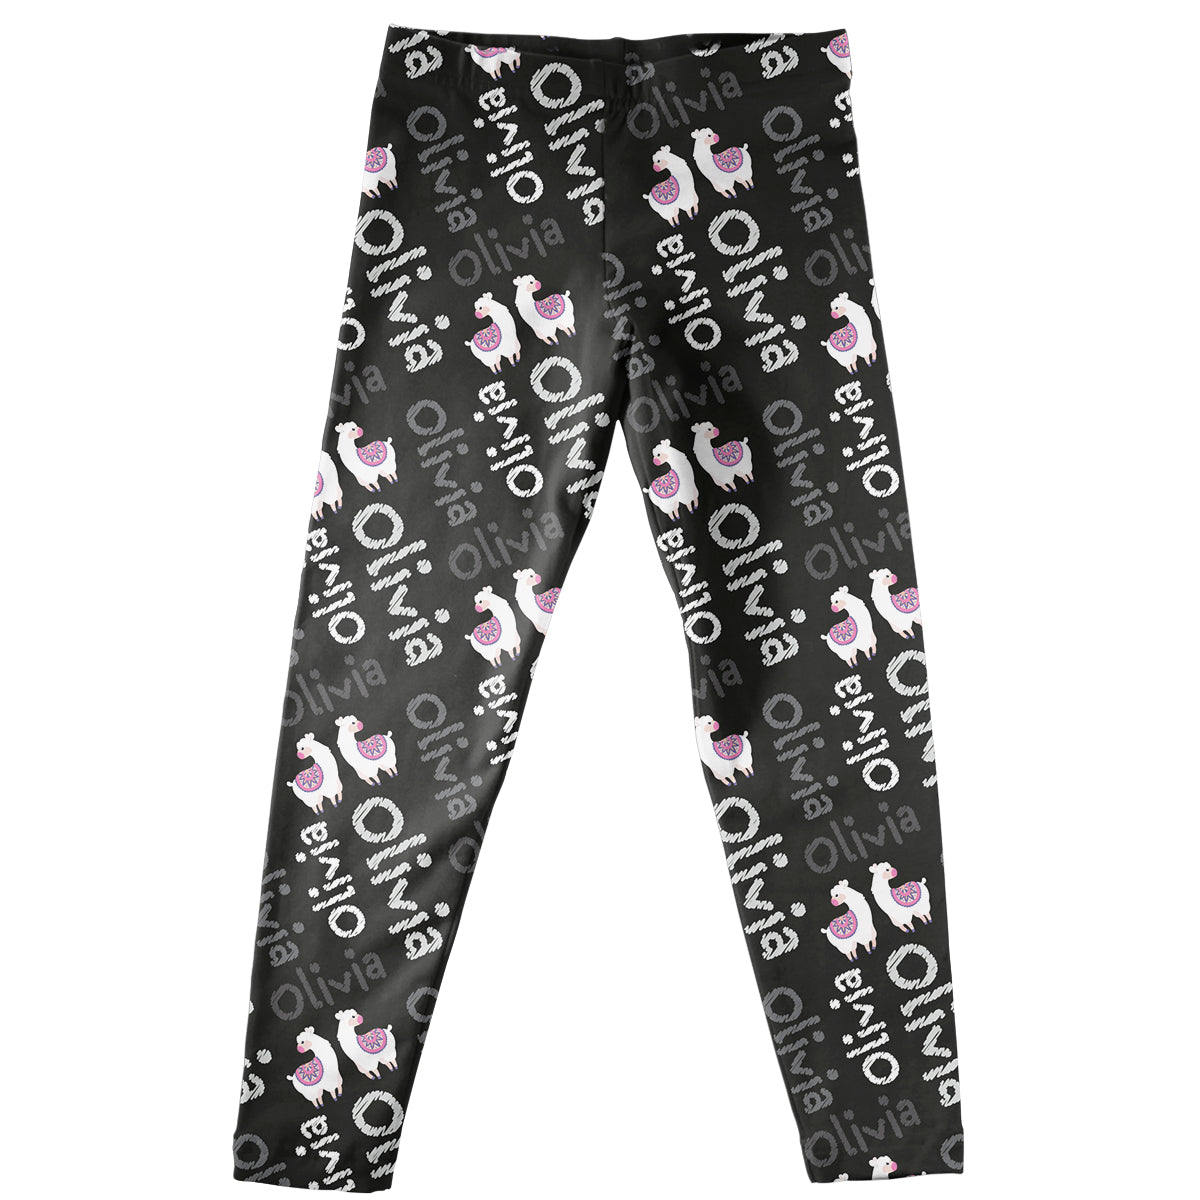 Black and white llamas girls leggings with name - Wimziy&Co.